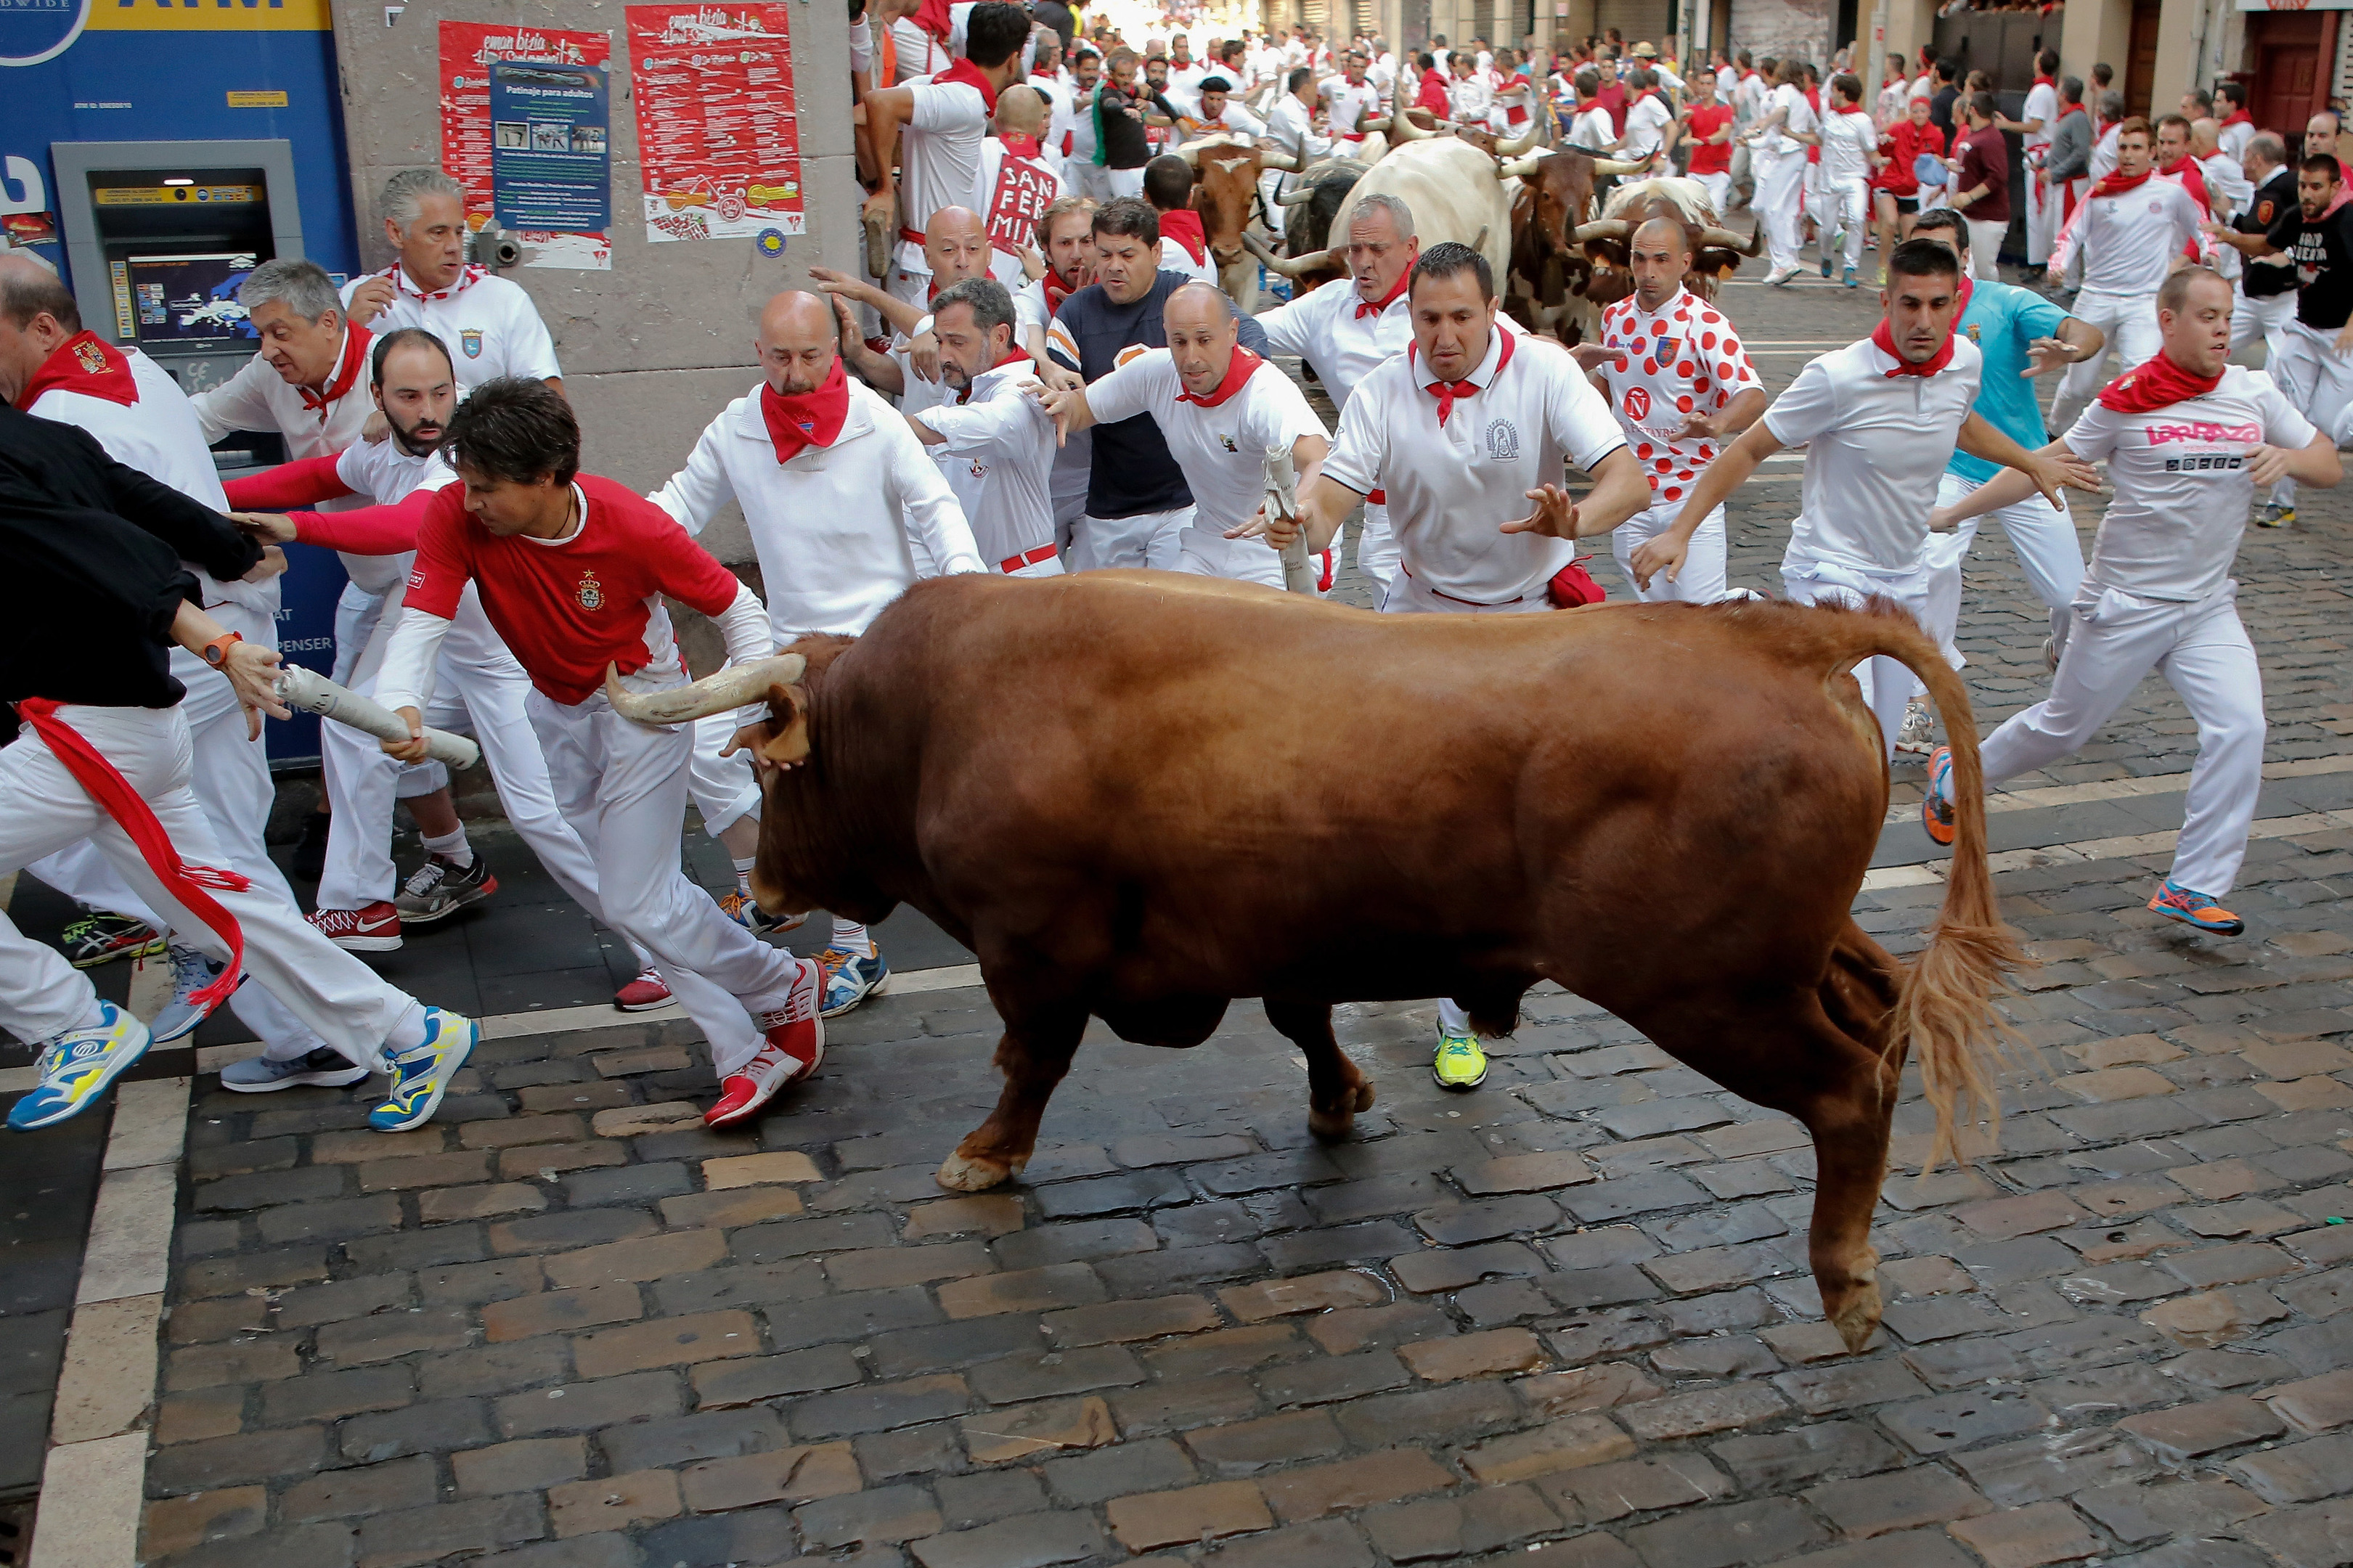 Revellers run with Cebada Gago's fighting bulls entering Estafeta Street as a bull charge over runners during the third day of the San Fermin Running of the Bulls festival (Pablo Blazquez Dominguez/Getty Images)